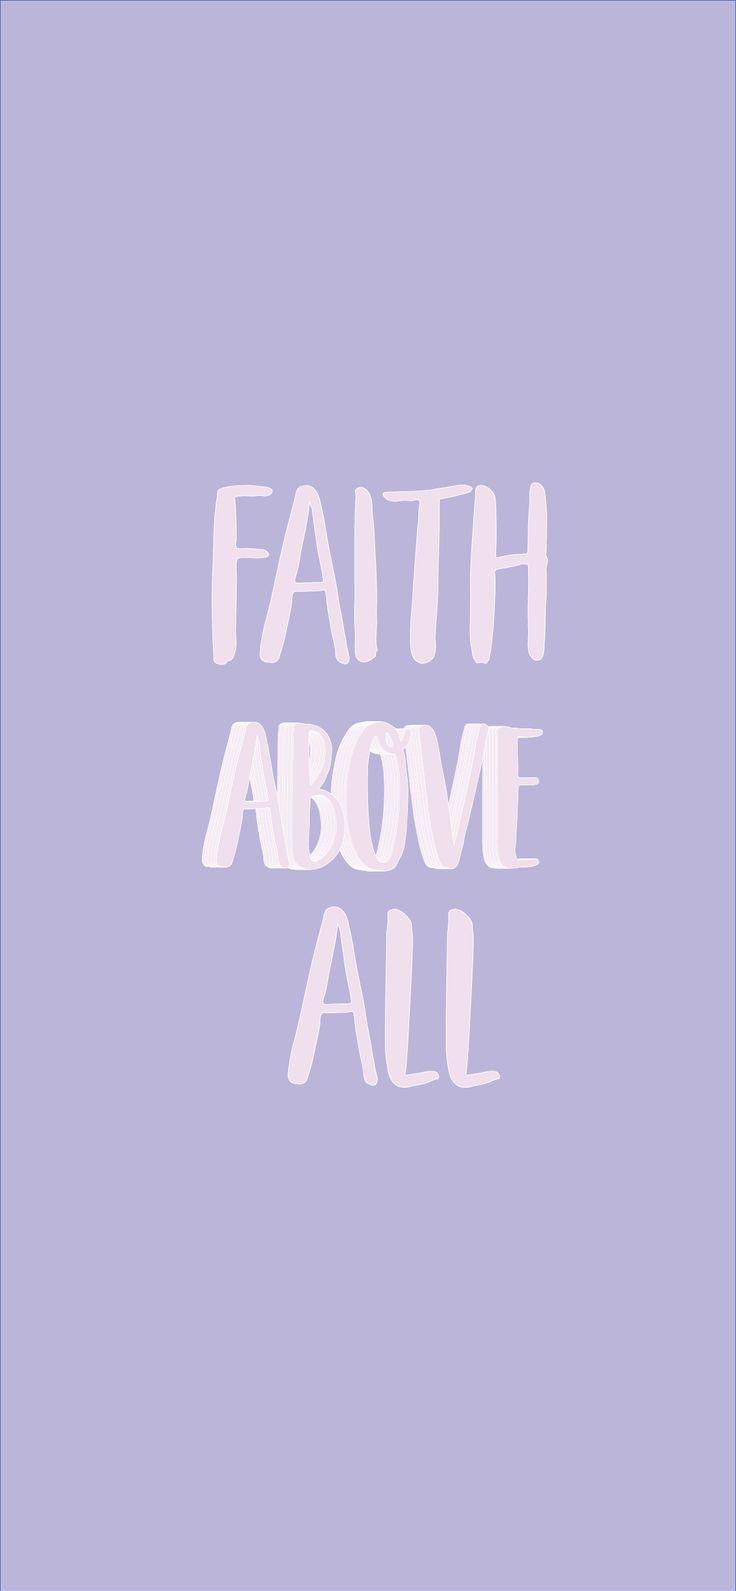 Faith Above All Wallpaper iPhone Bible Quotes